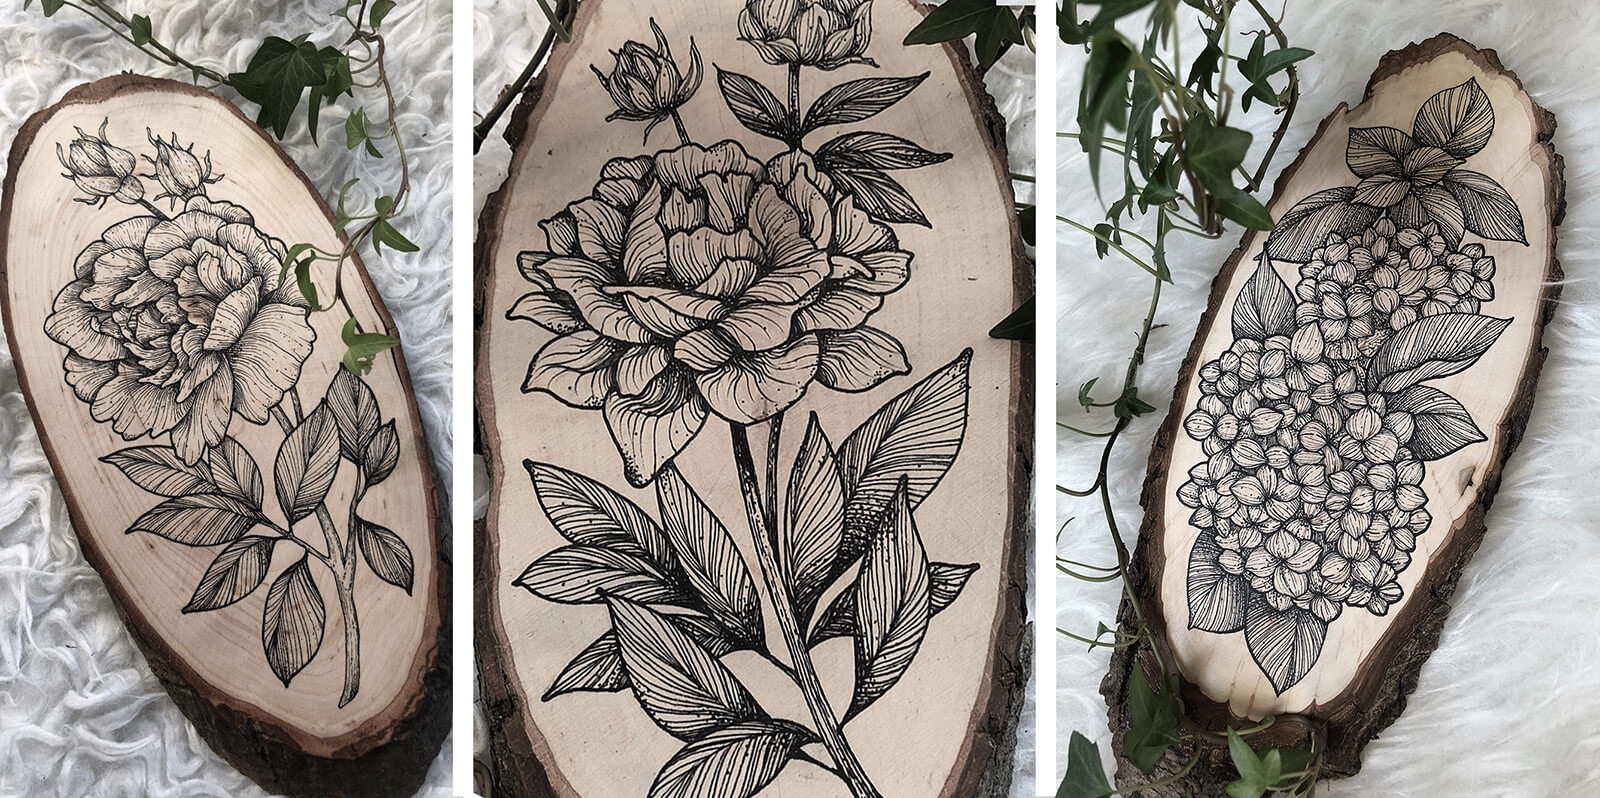 Isa Schürholz / Ash and Wood / More than a Tattooer